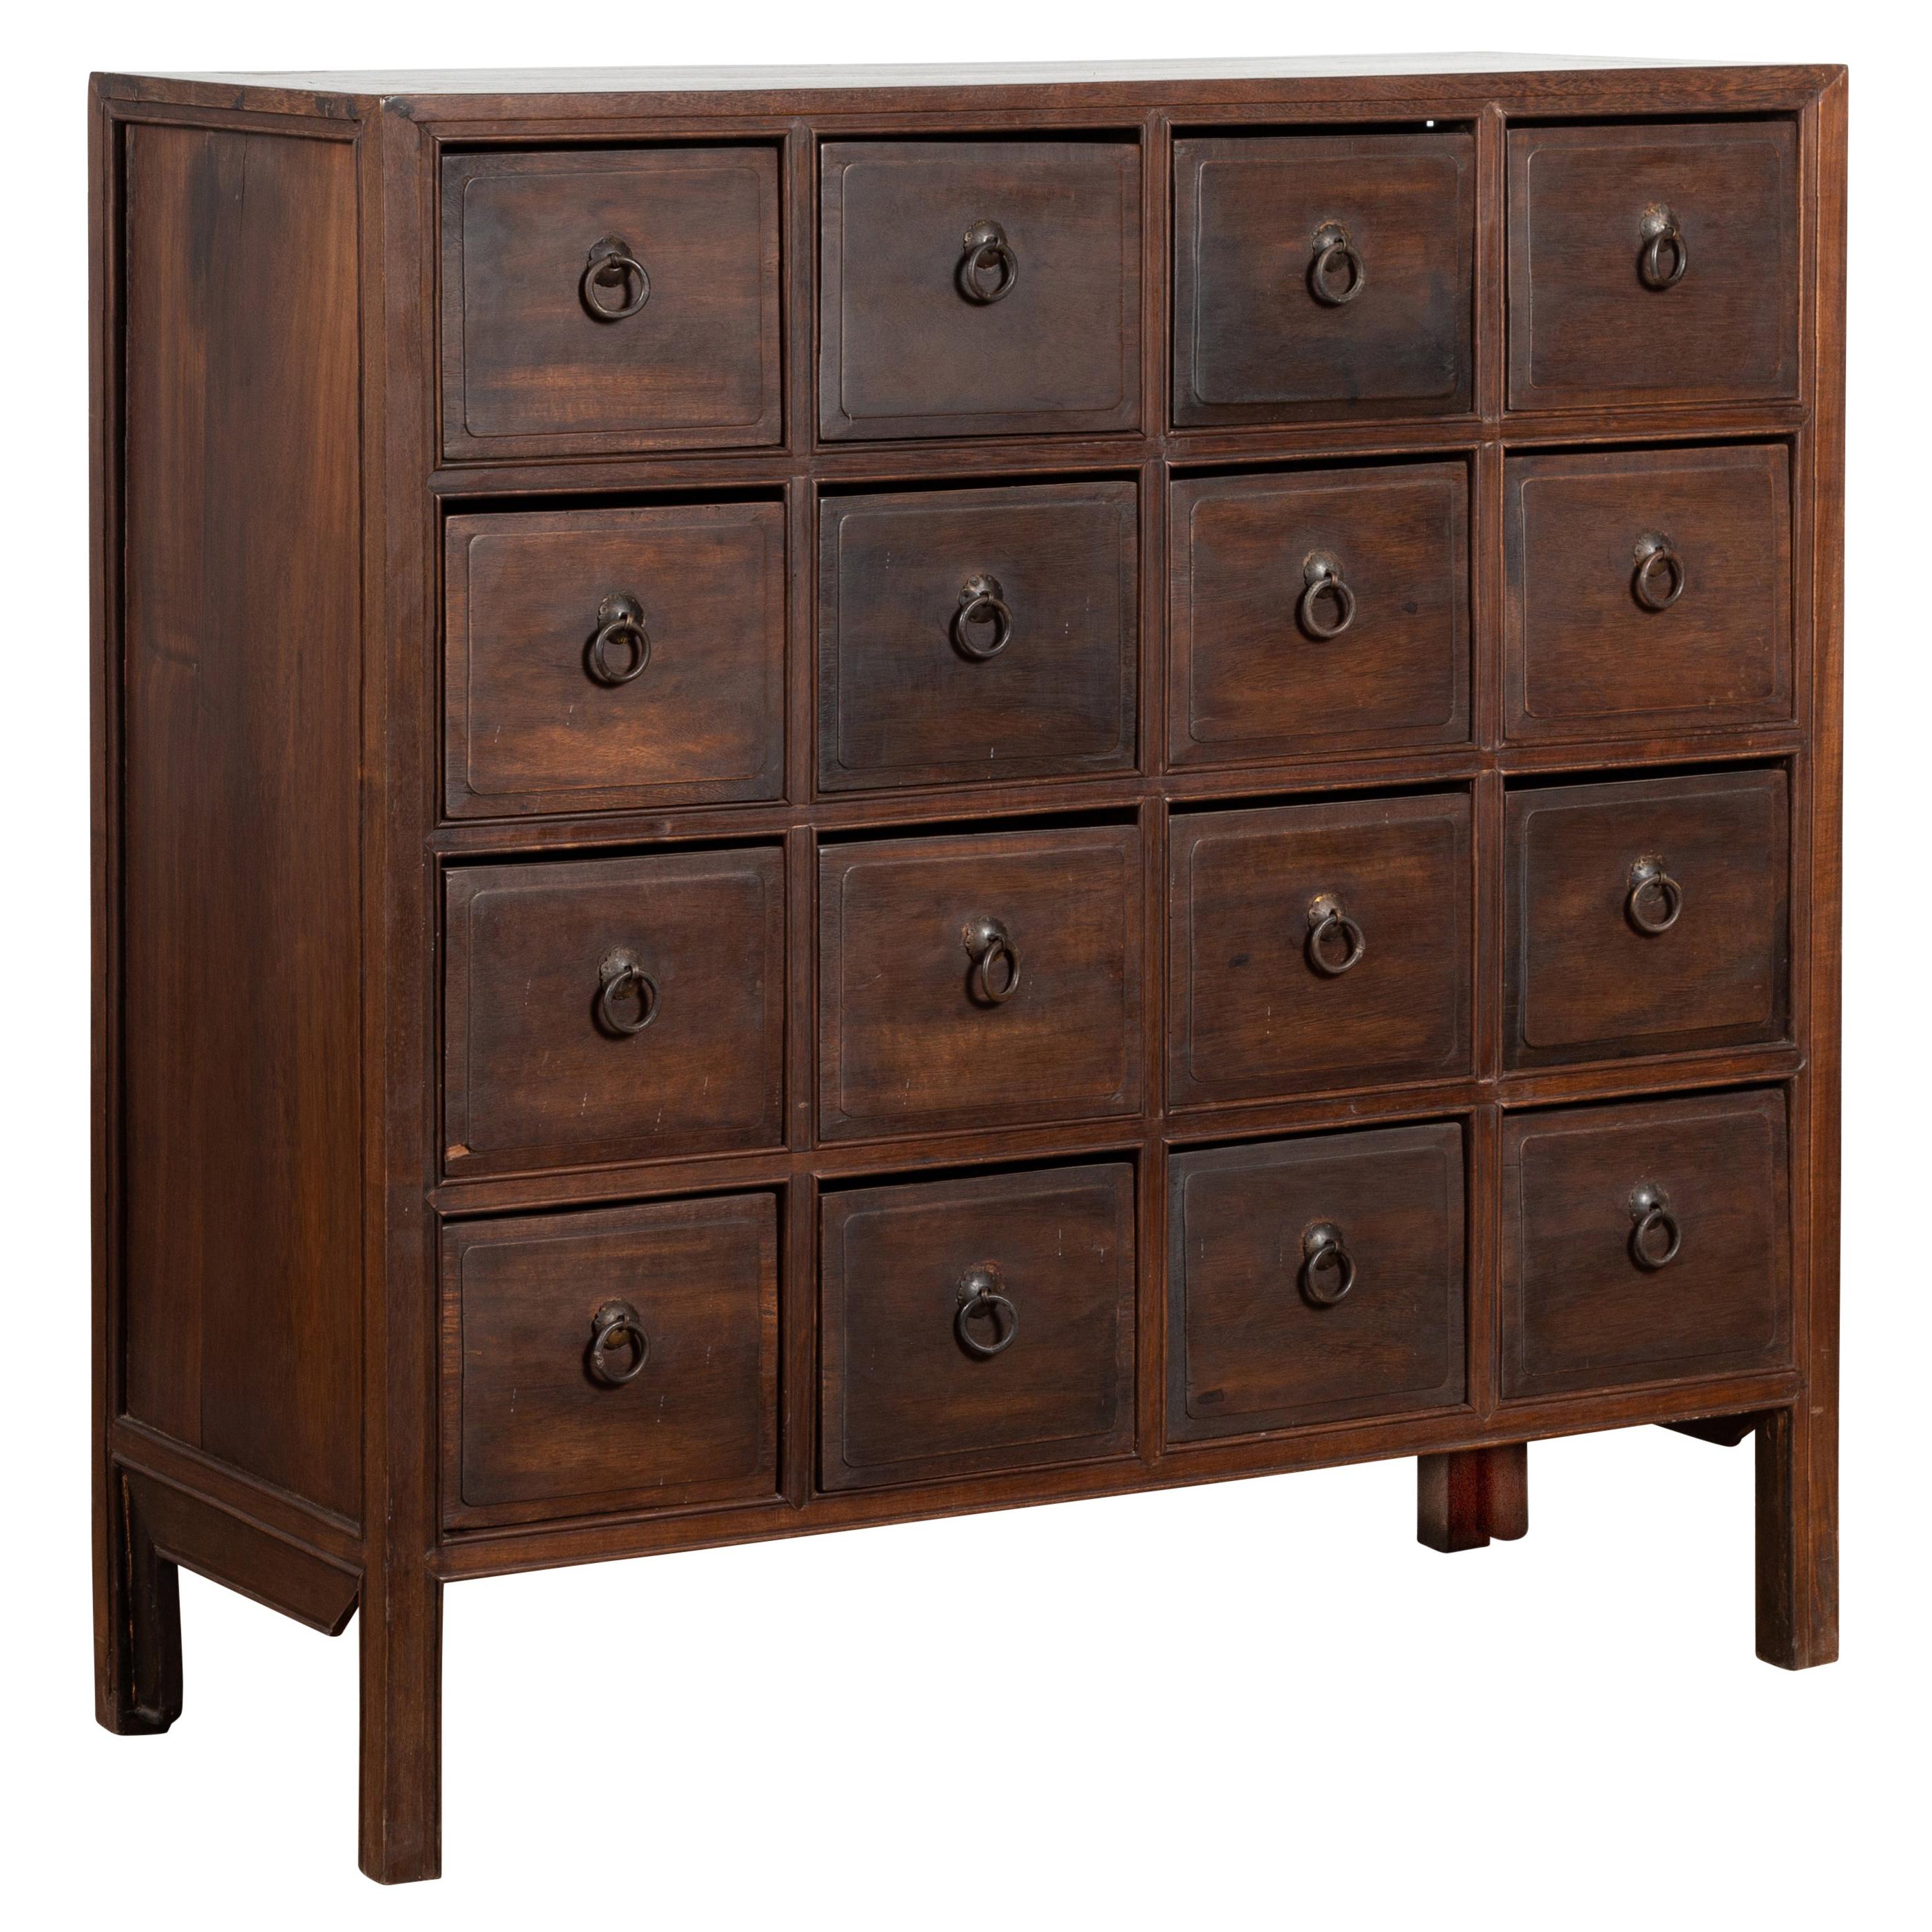 Chinese Vintage Apothecary Cabinet with 16 Drawers and Dark Brown Patina